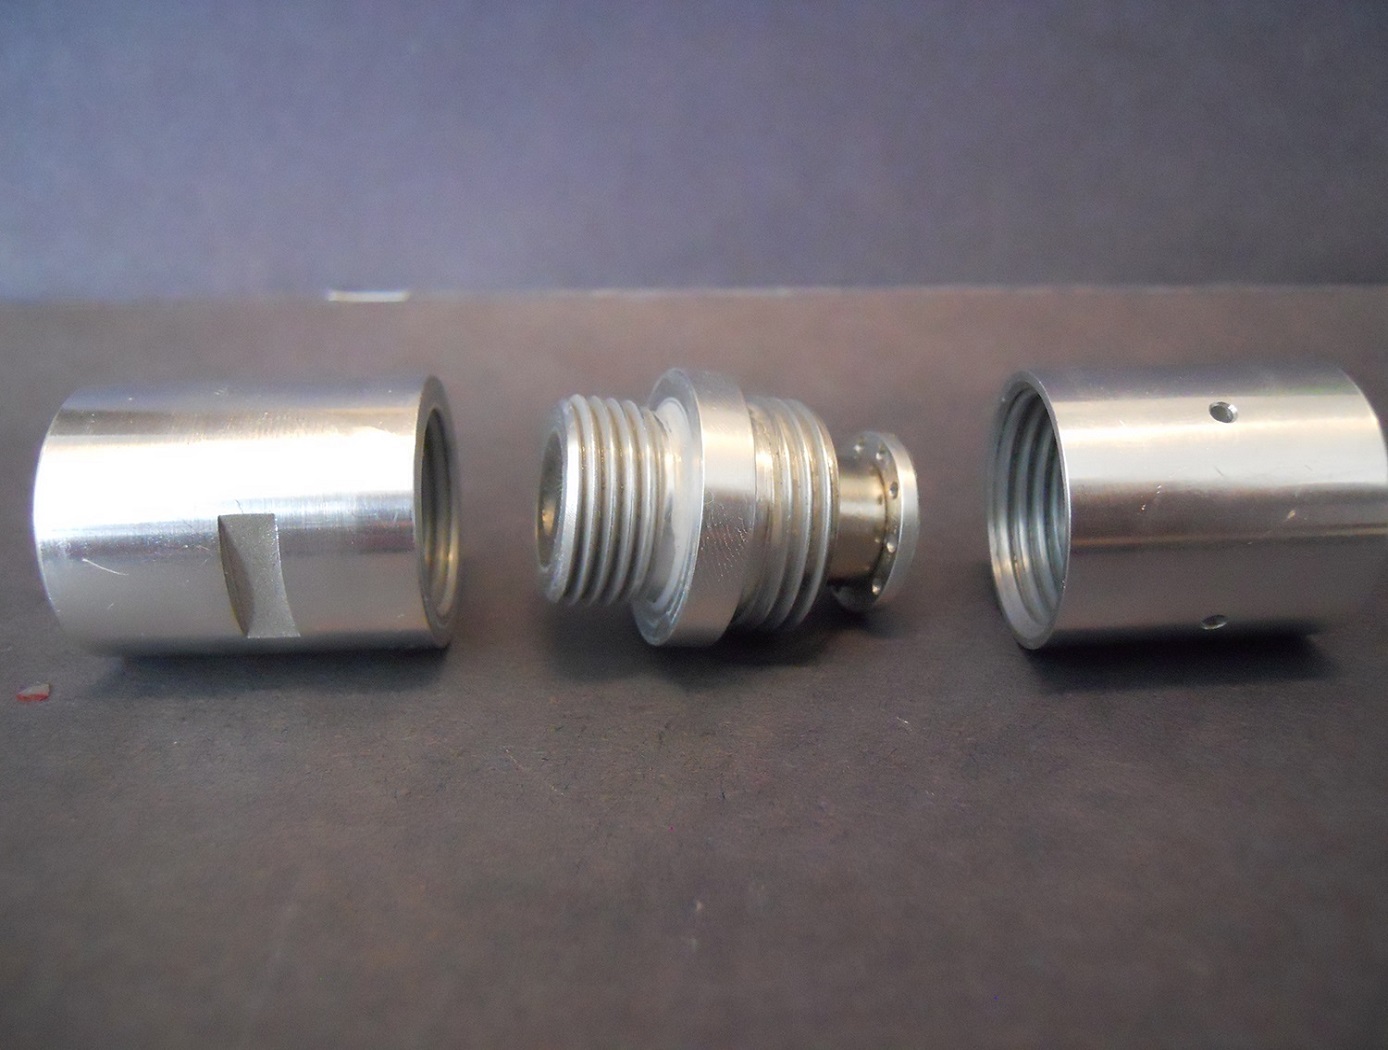 Up-close photograph of magnetic pressure valves.